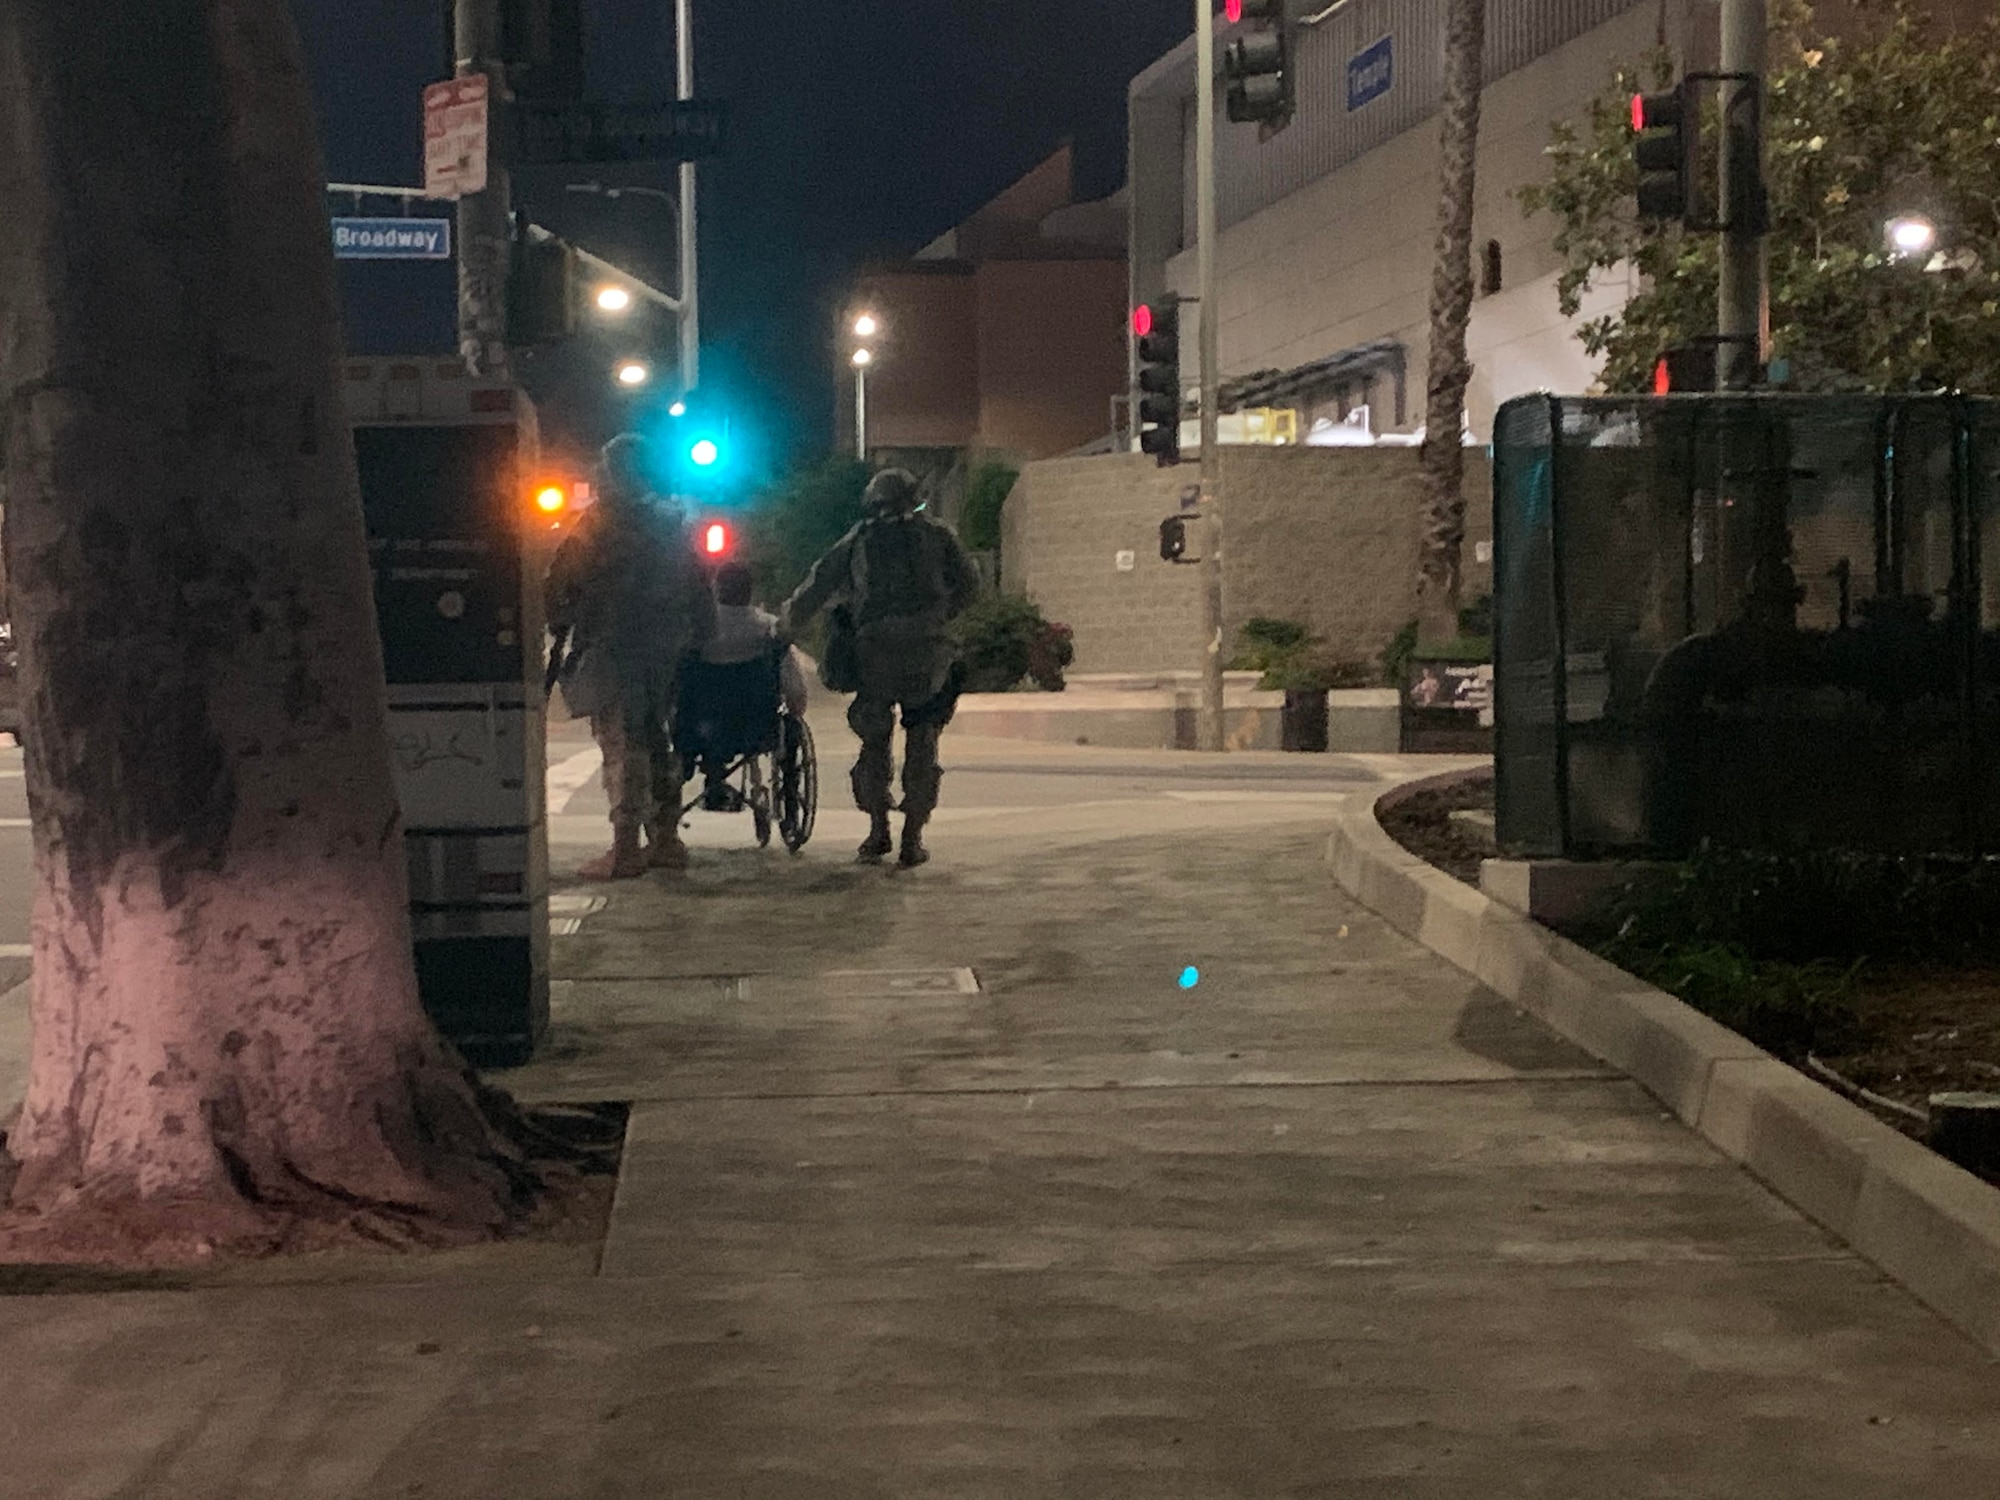 U.S. Air National Guard Tech. Sgt. Omar Godoy and Master Sgt. Jordan Kennedy from the California Air National Guard's 146th Airlift Wing's Security Forces Squadron, assist with transporting a elderly pedestrian by pushing his wheelchair up Temple Ave in Los Angeles, California. June 1, 2019. Courtesy photo by California Military Department.